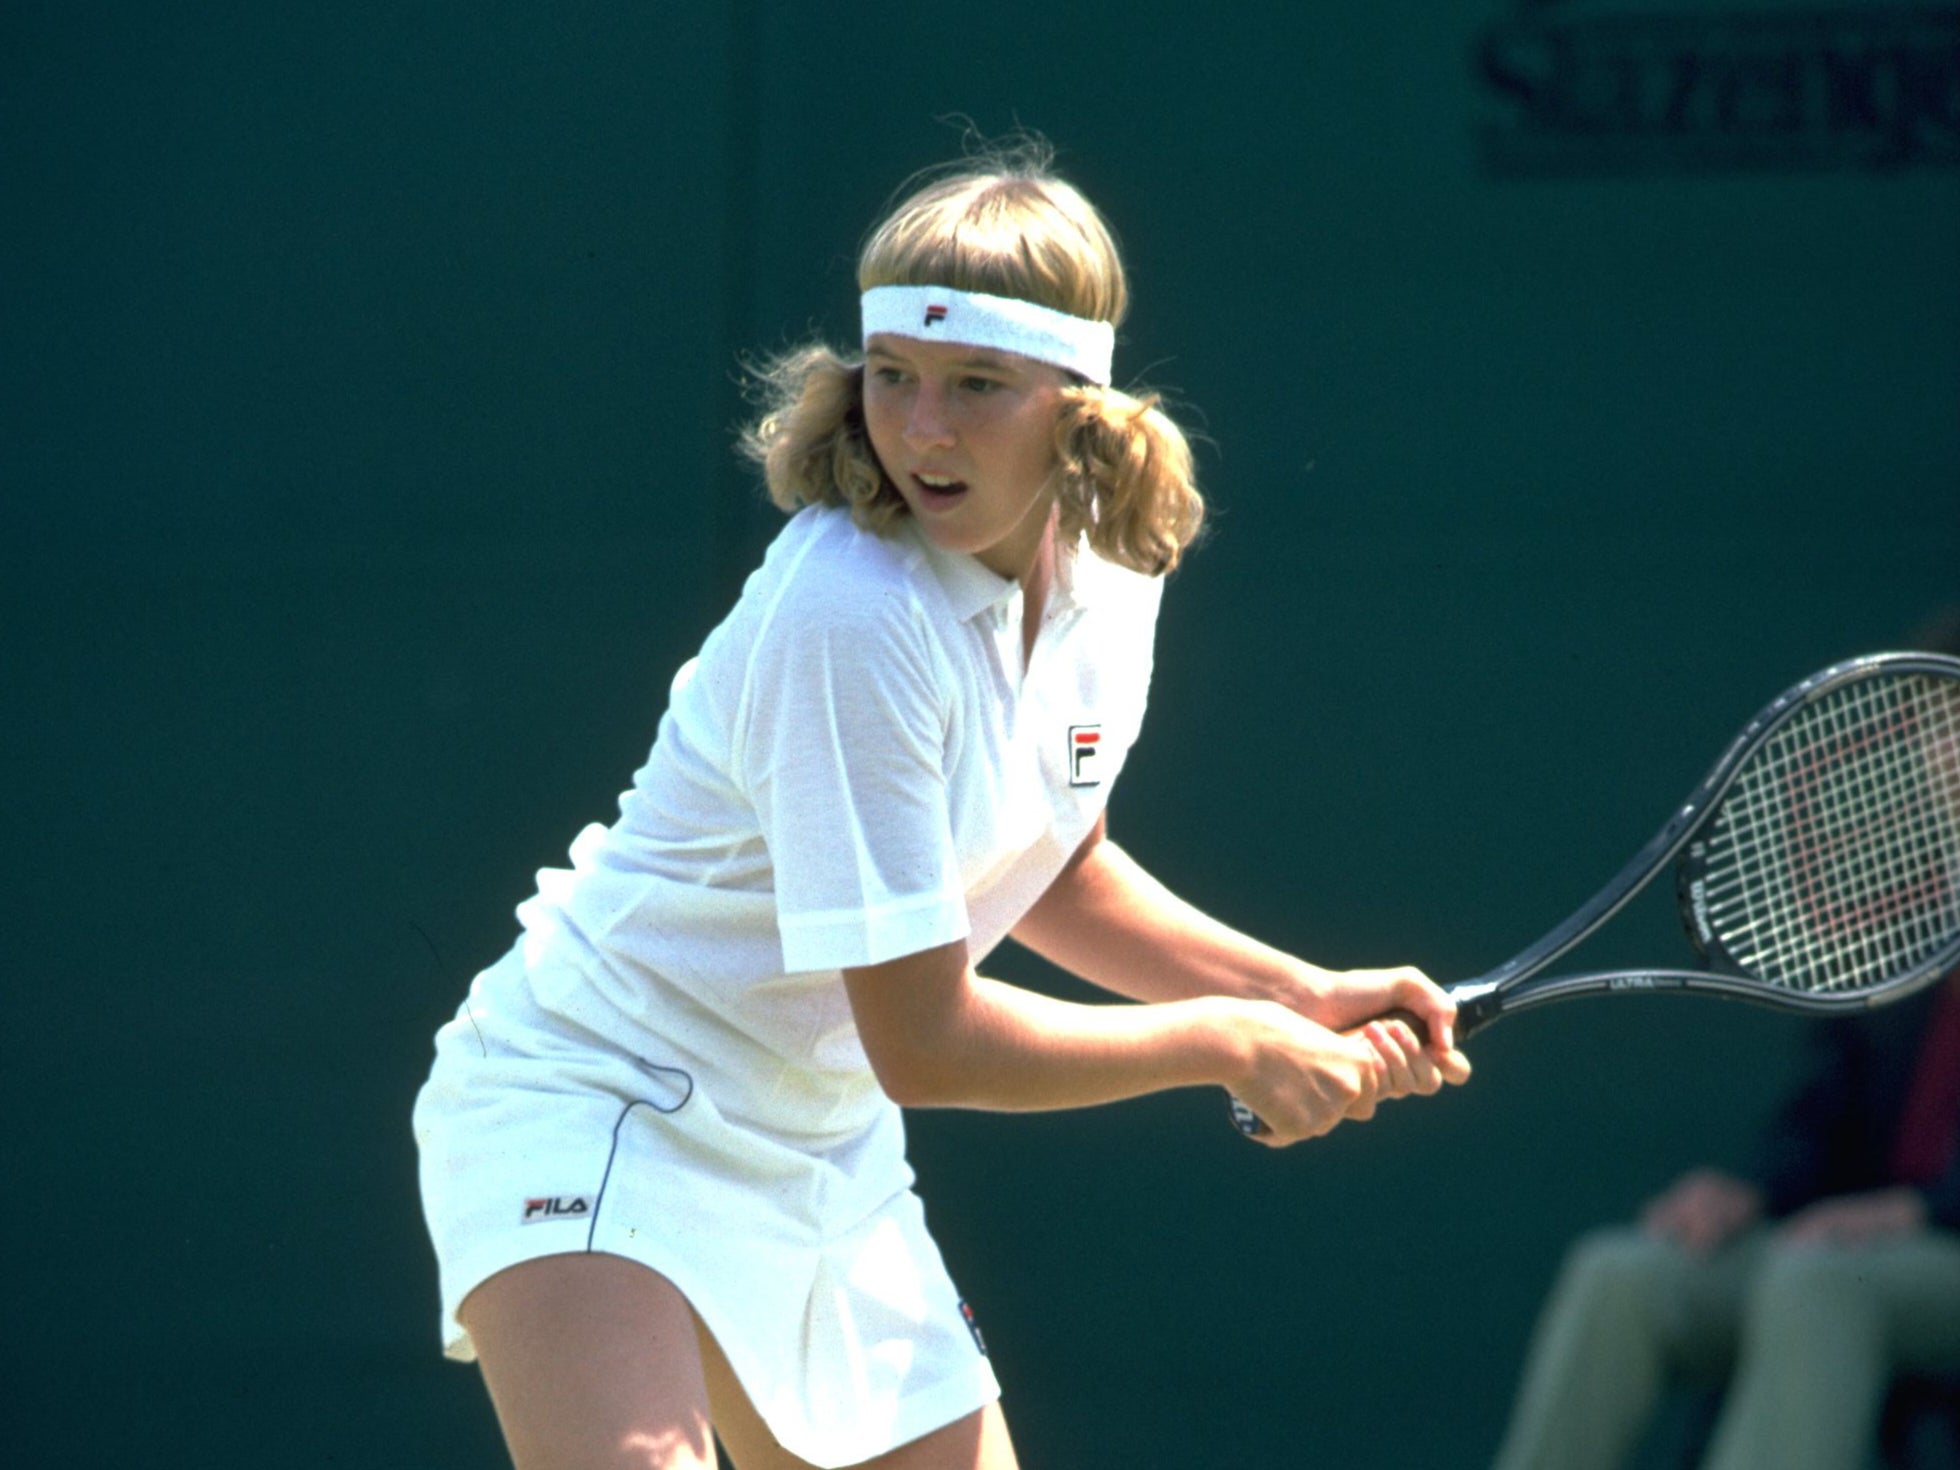 Andrea Jaeger competes at Wimbledon in 1982